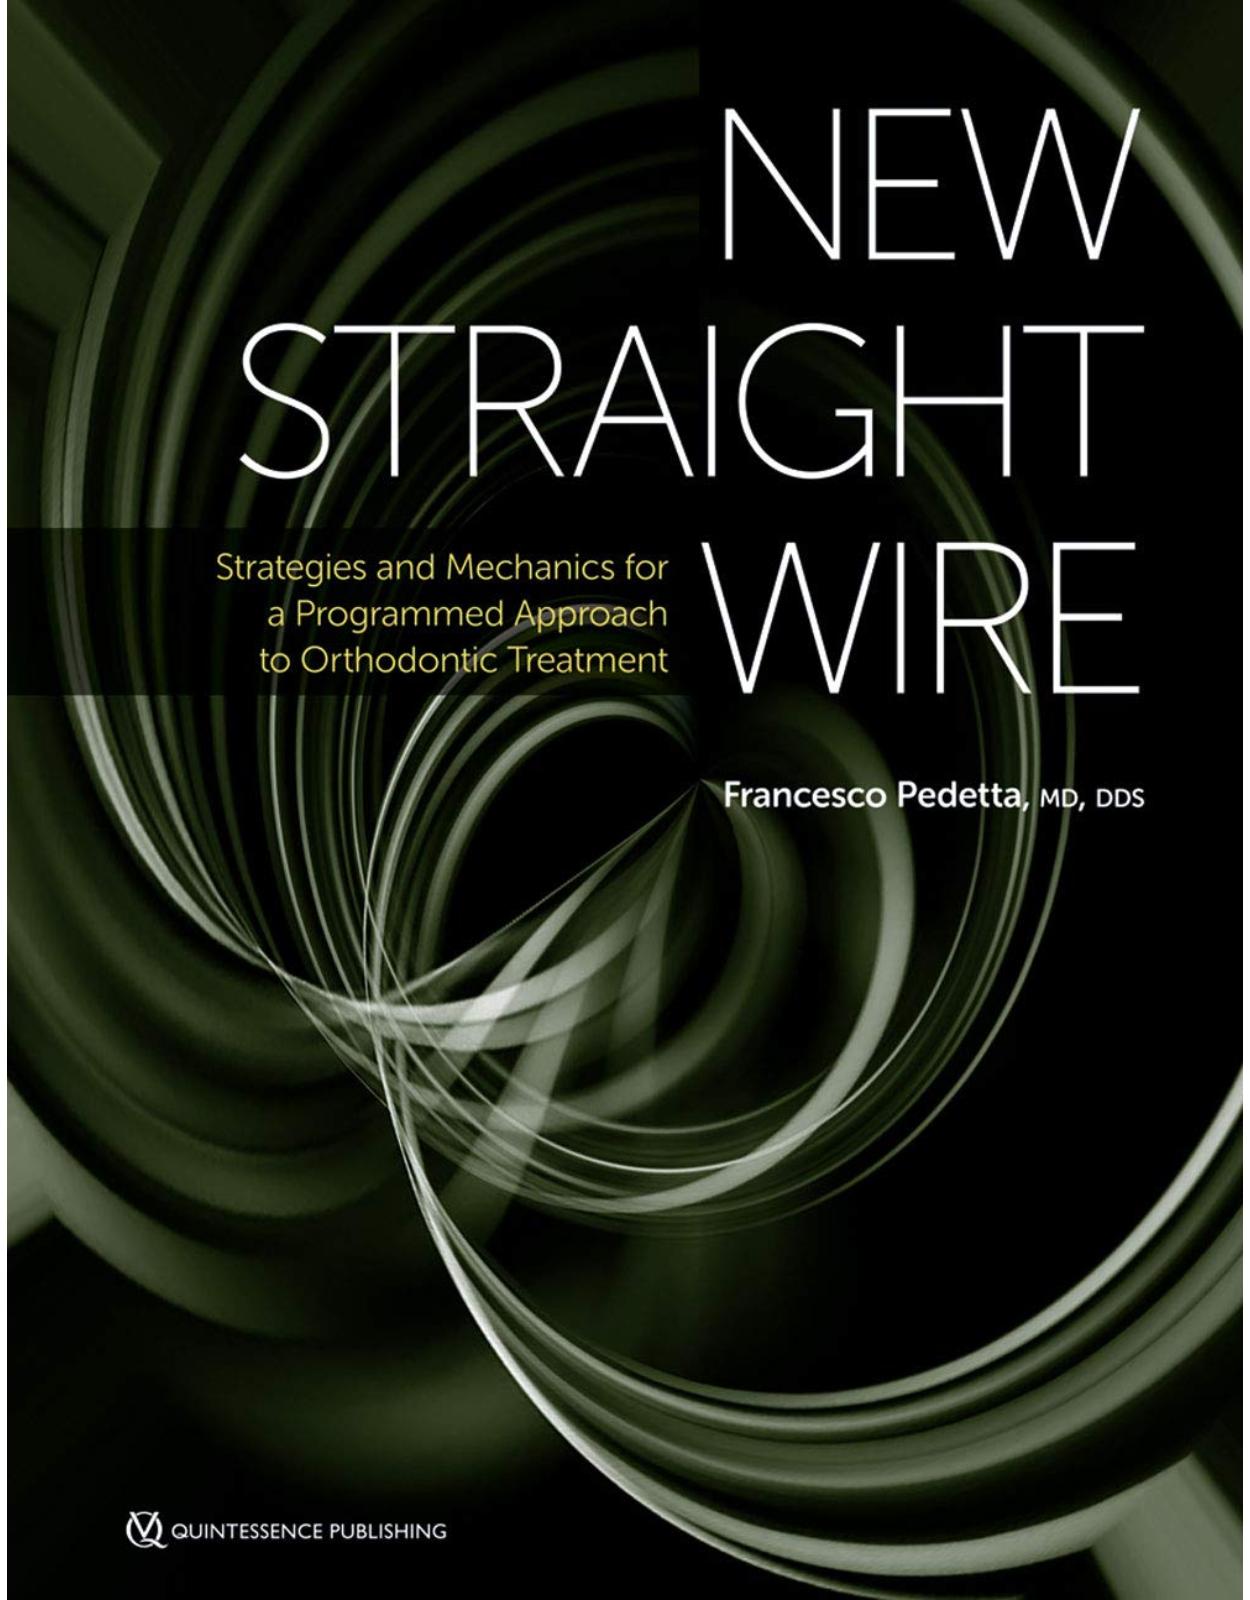 New Straight Wire: Strategies and Mechanics for a Programmed Approach to Orthodontic Treatment